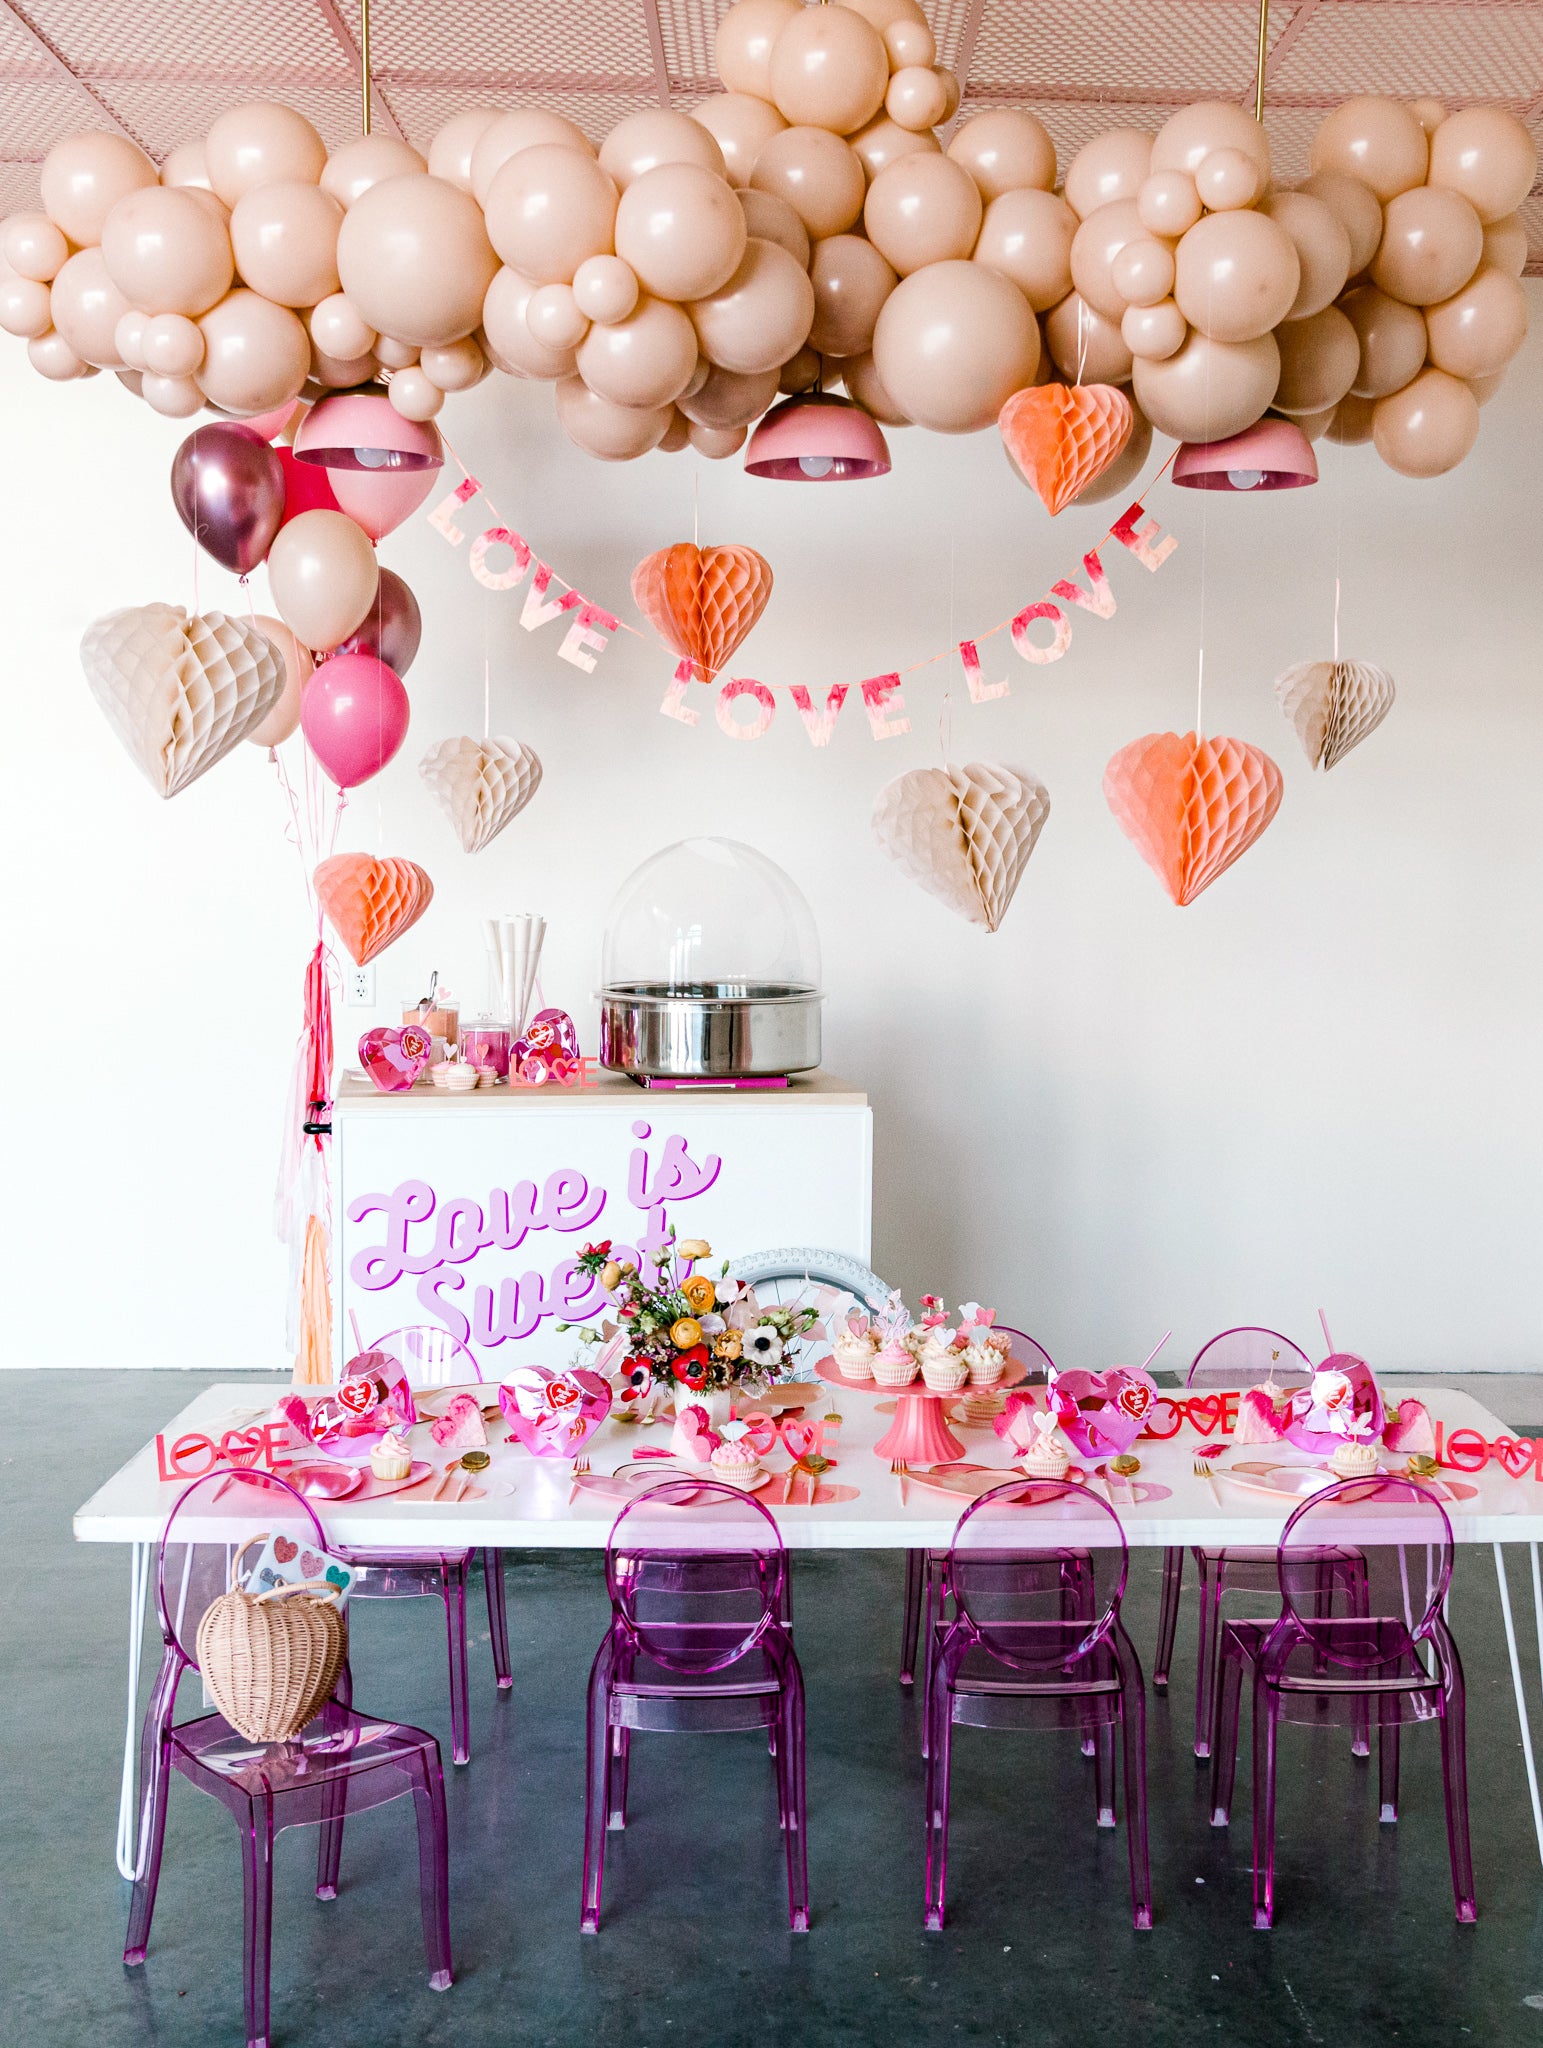 Girls Valentine's Day party set up with pink ombre decorations